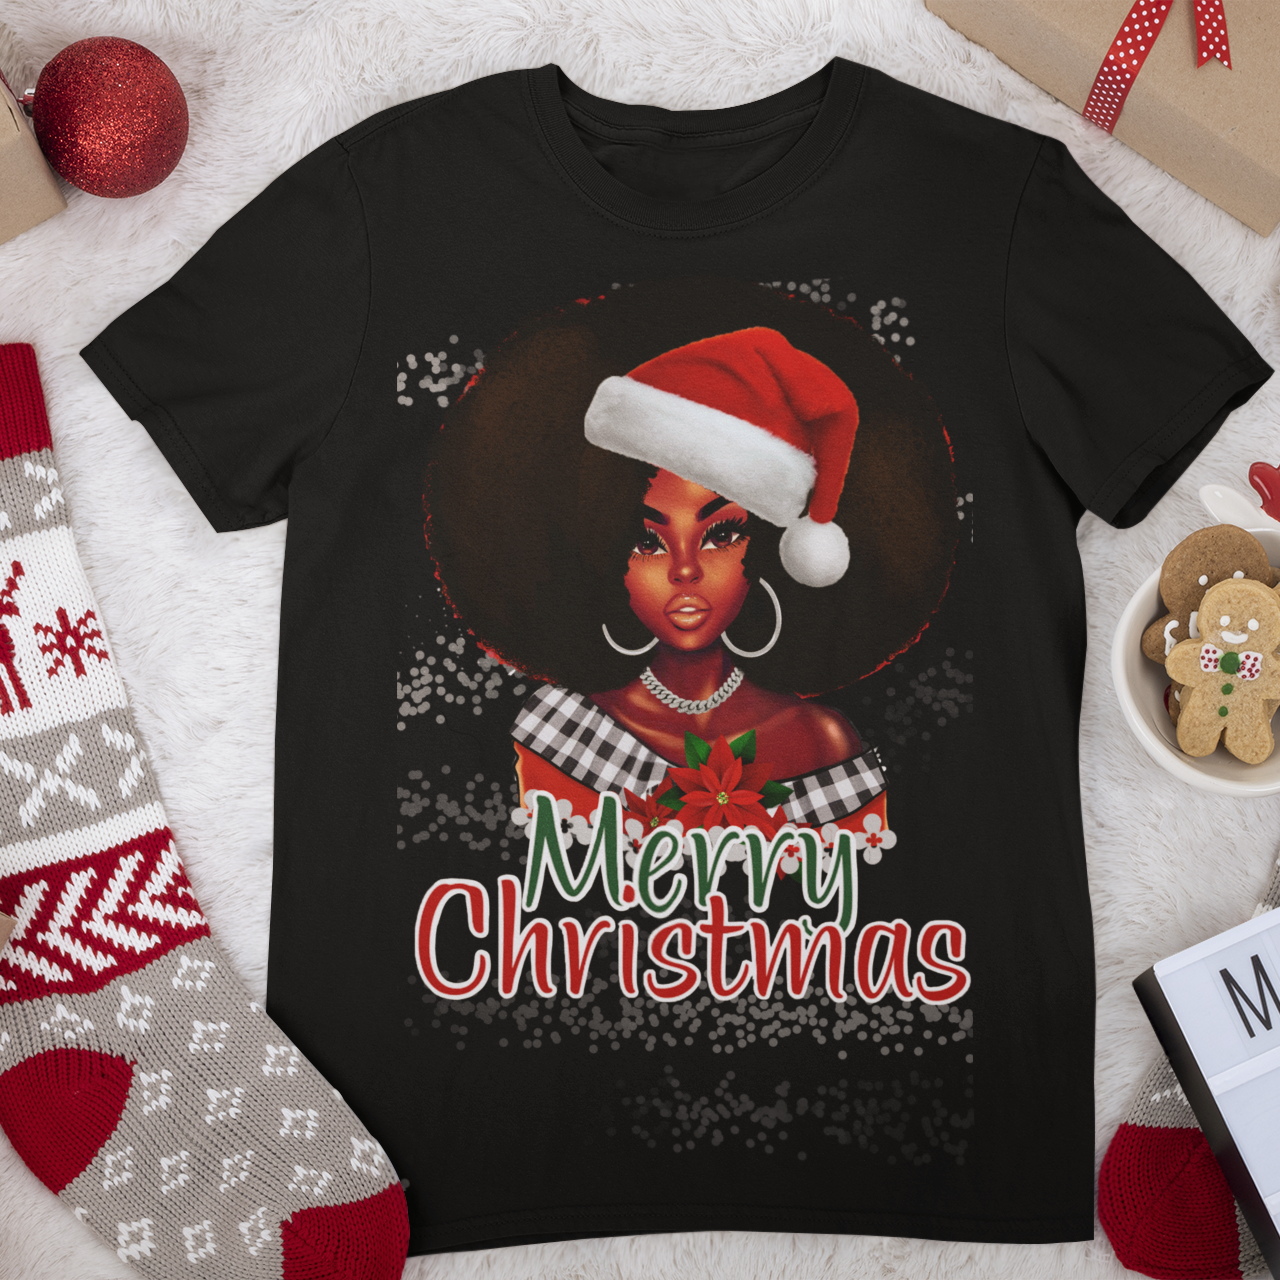 mockup-of-a-round-neck-tee-laid-on-a-christmas-decorated-surface-m37